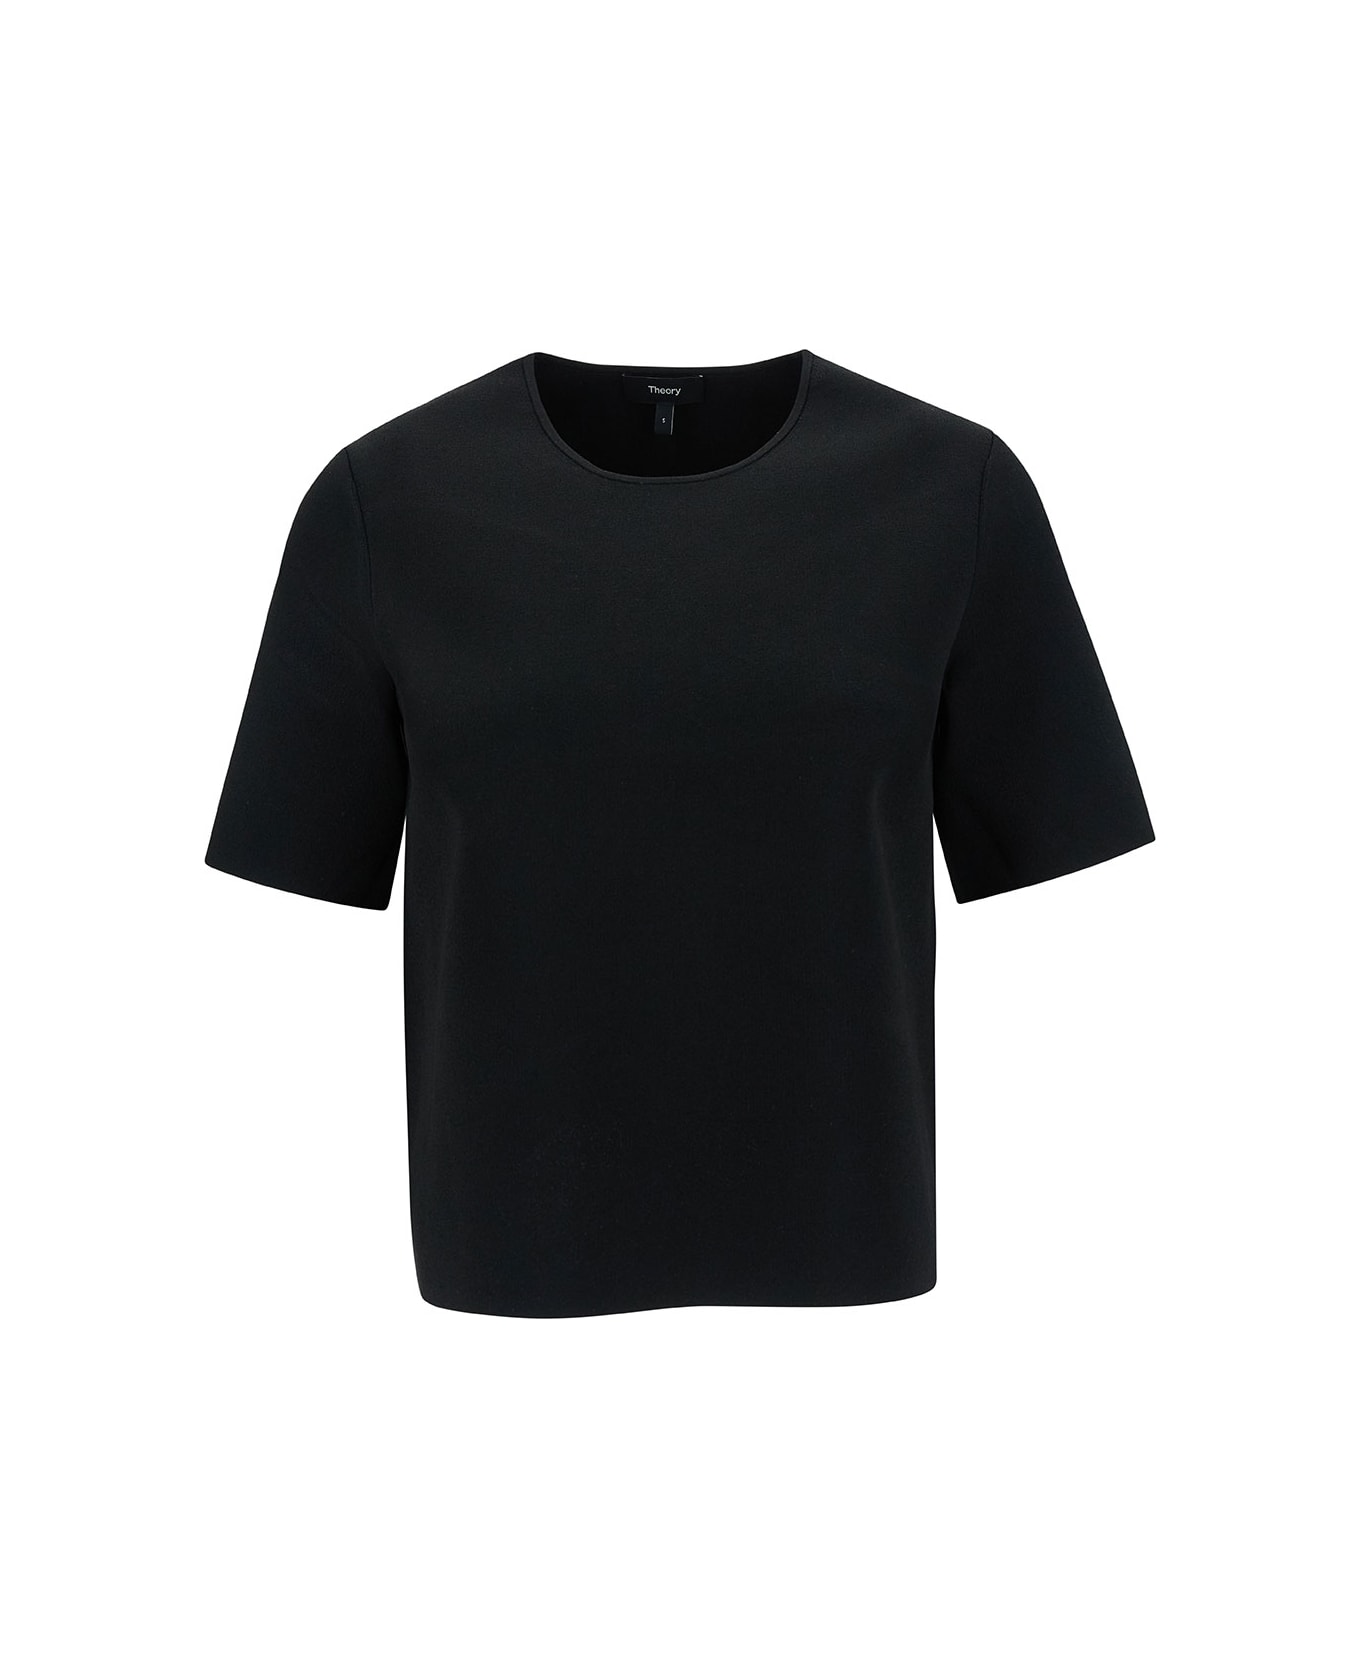 Theory Black T-shirt With U Neckline In Viscose Blend Woman - Black